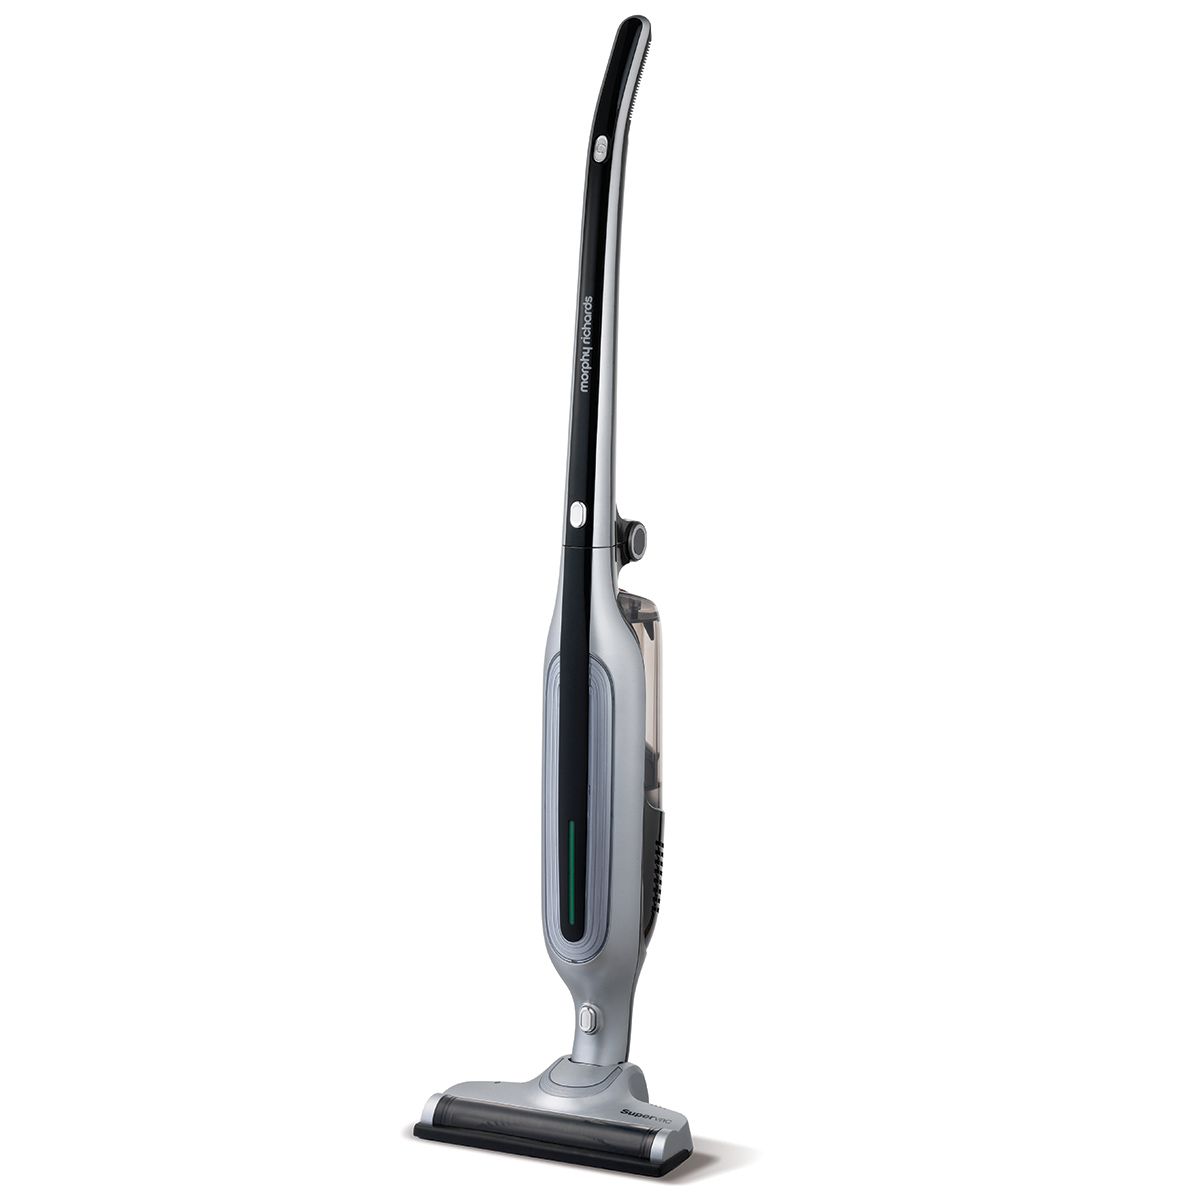 Morphy Richards Cordless vacuum cleaner-Morphy Richards 